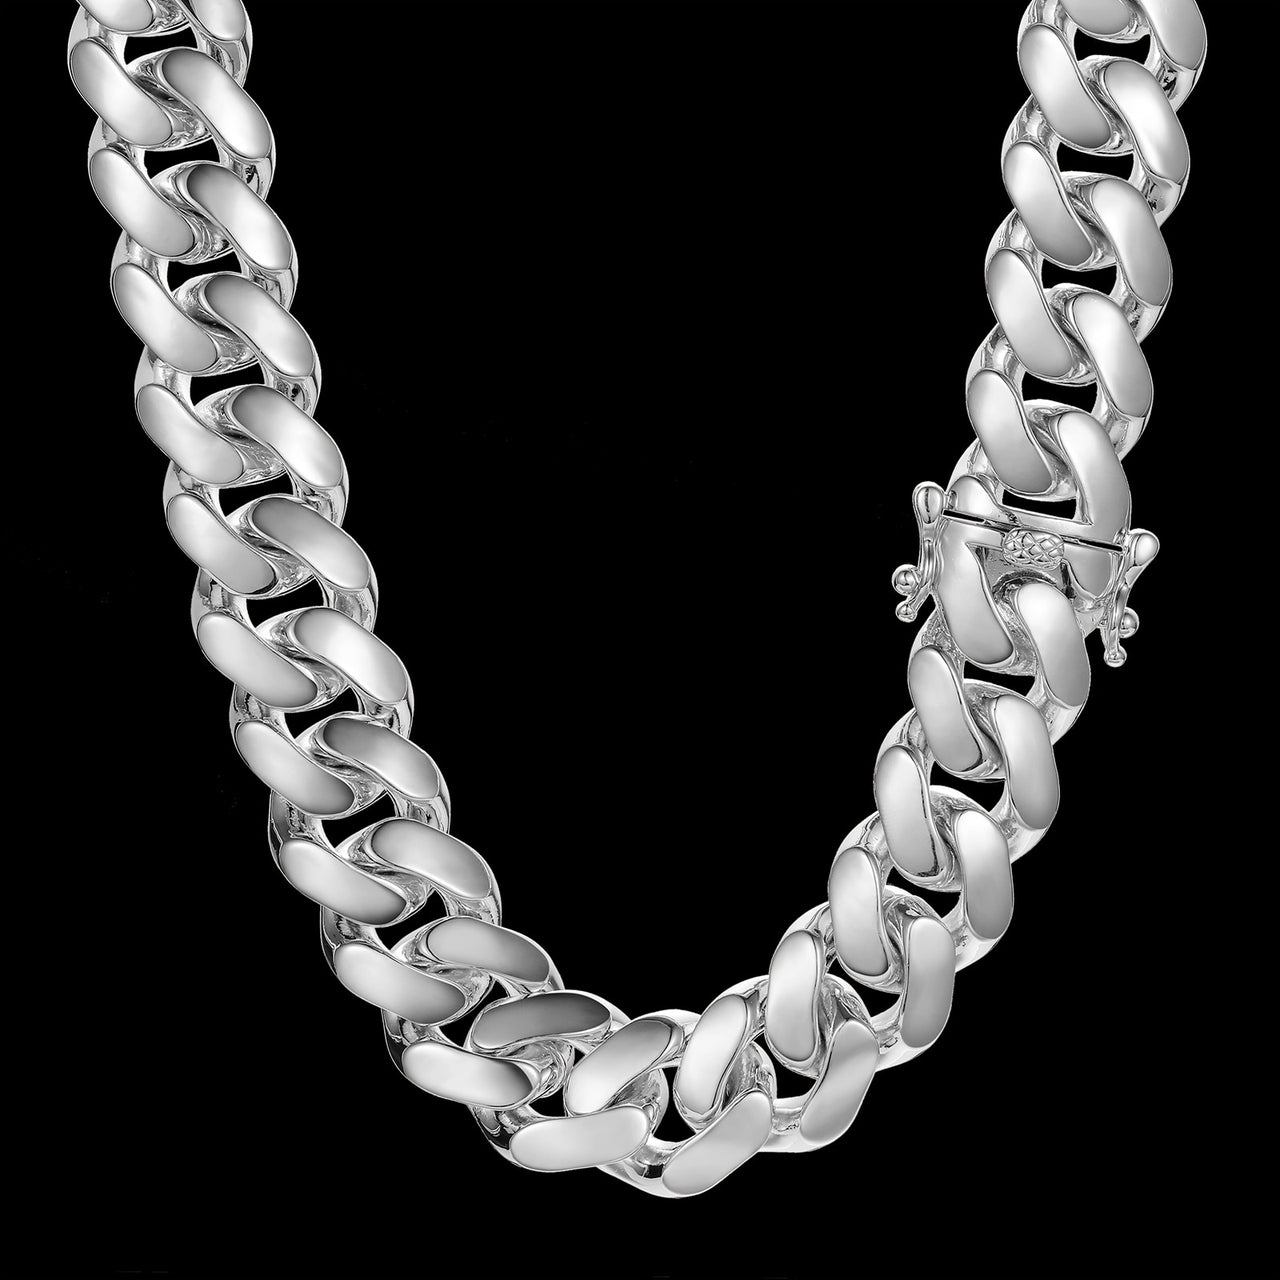 20mm Solid 18k Gold Plated Miami Cuban Link Chain - Different Drips